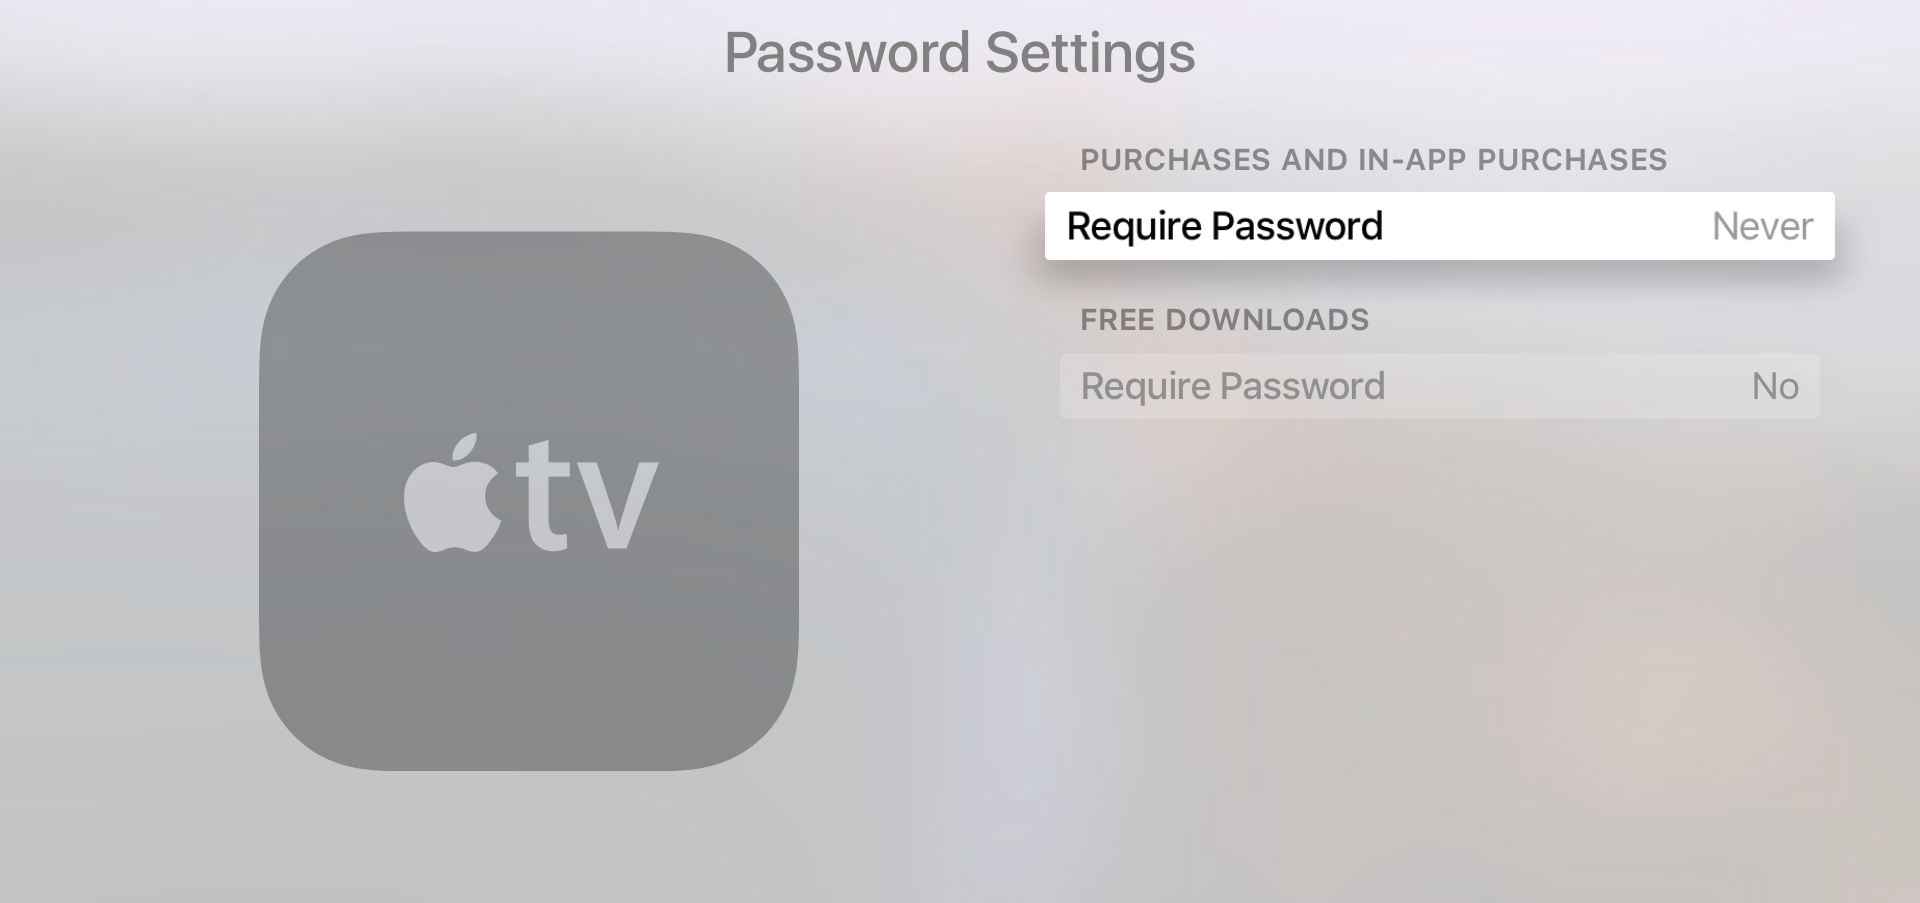 Password Settings Required to make purchases on Apple TV